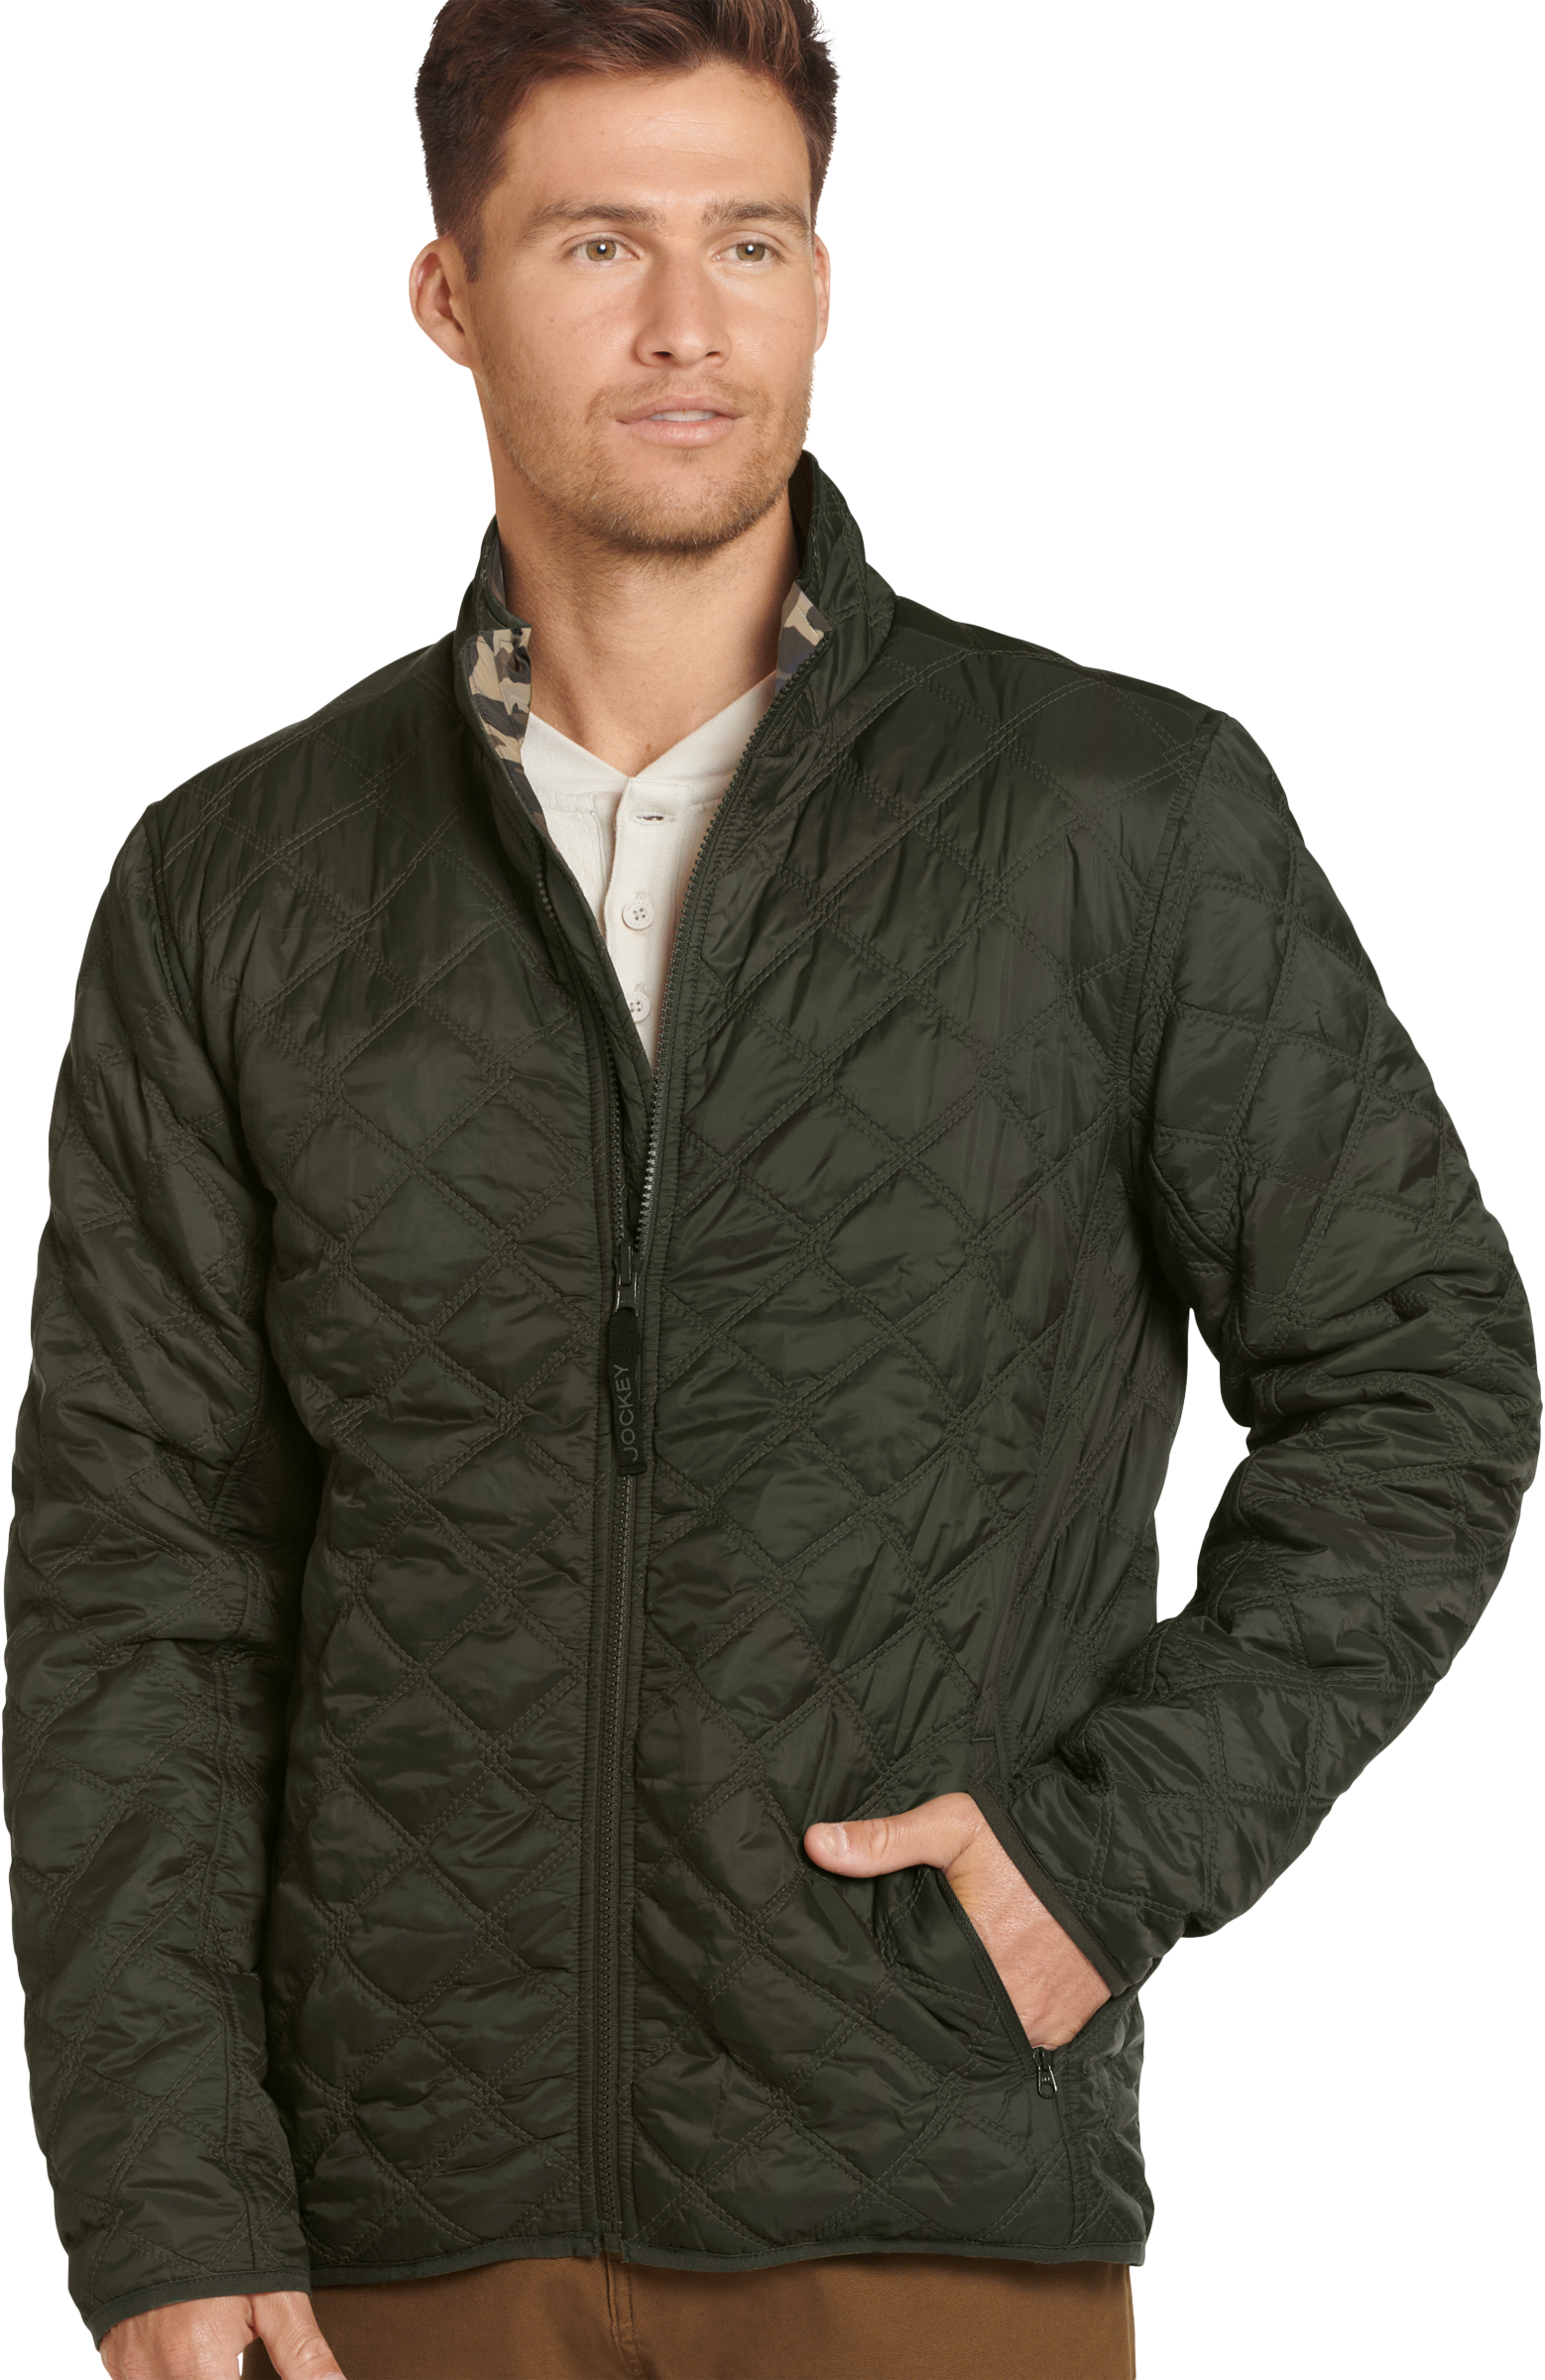 Jockey Outdoors Reversible Quilted Jacket for Men - Hunter Green - S